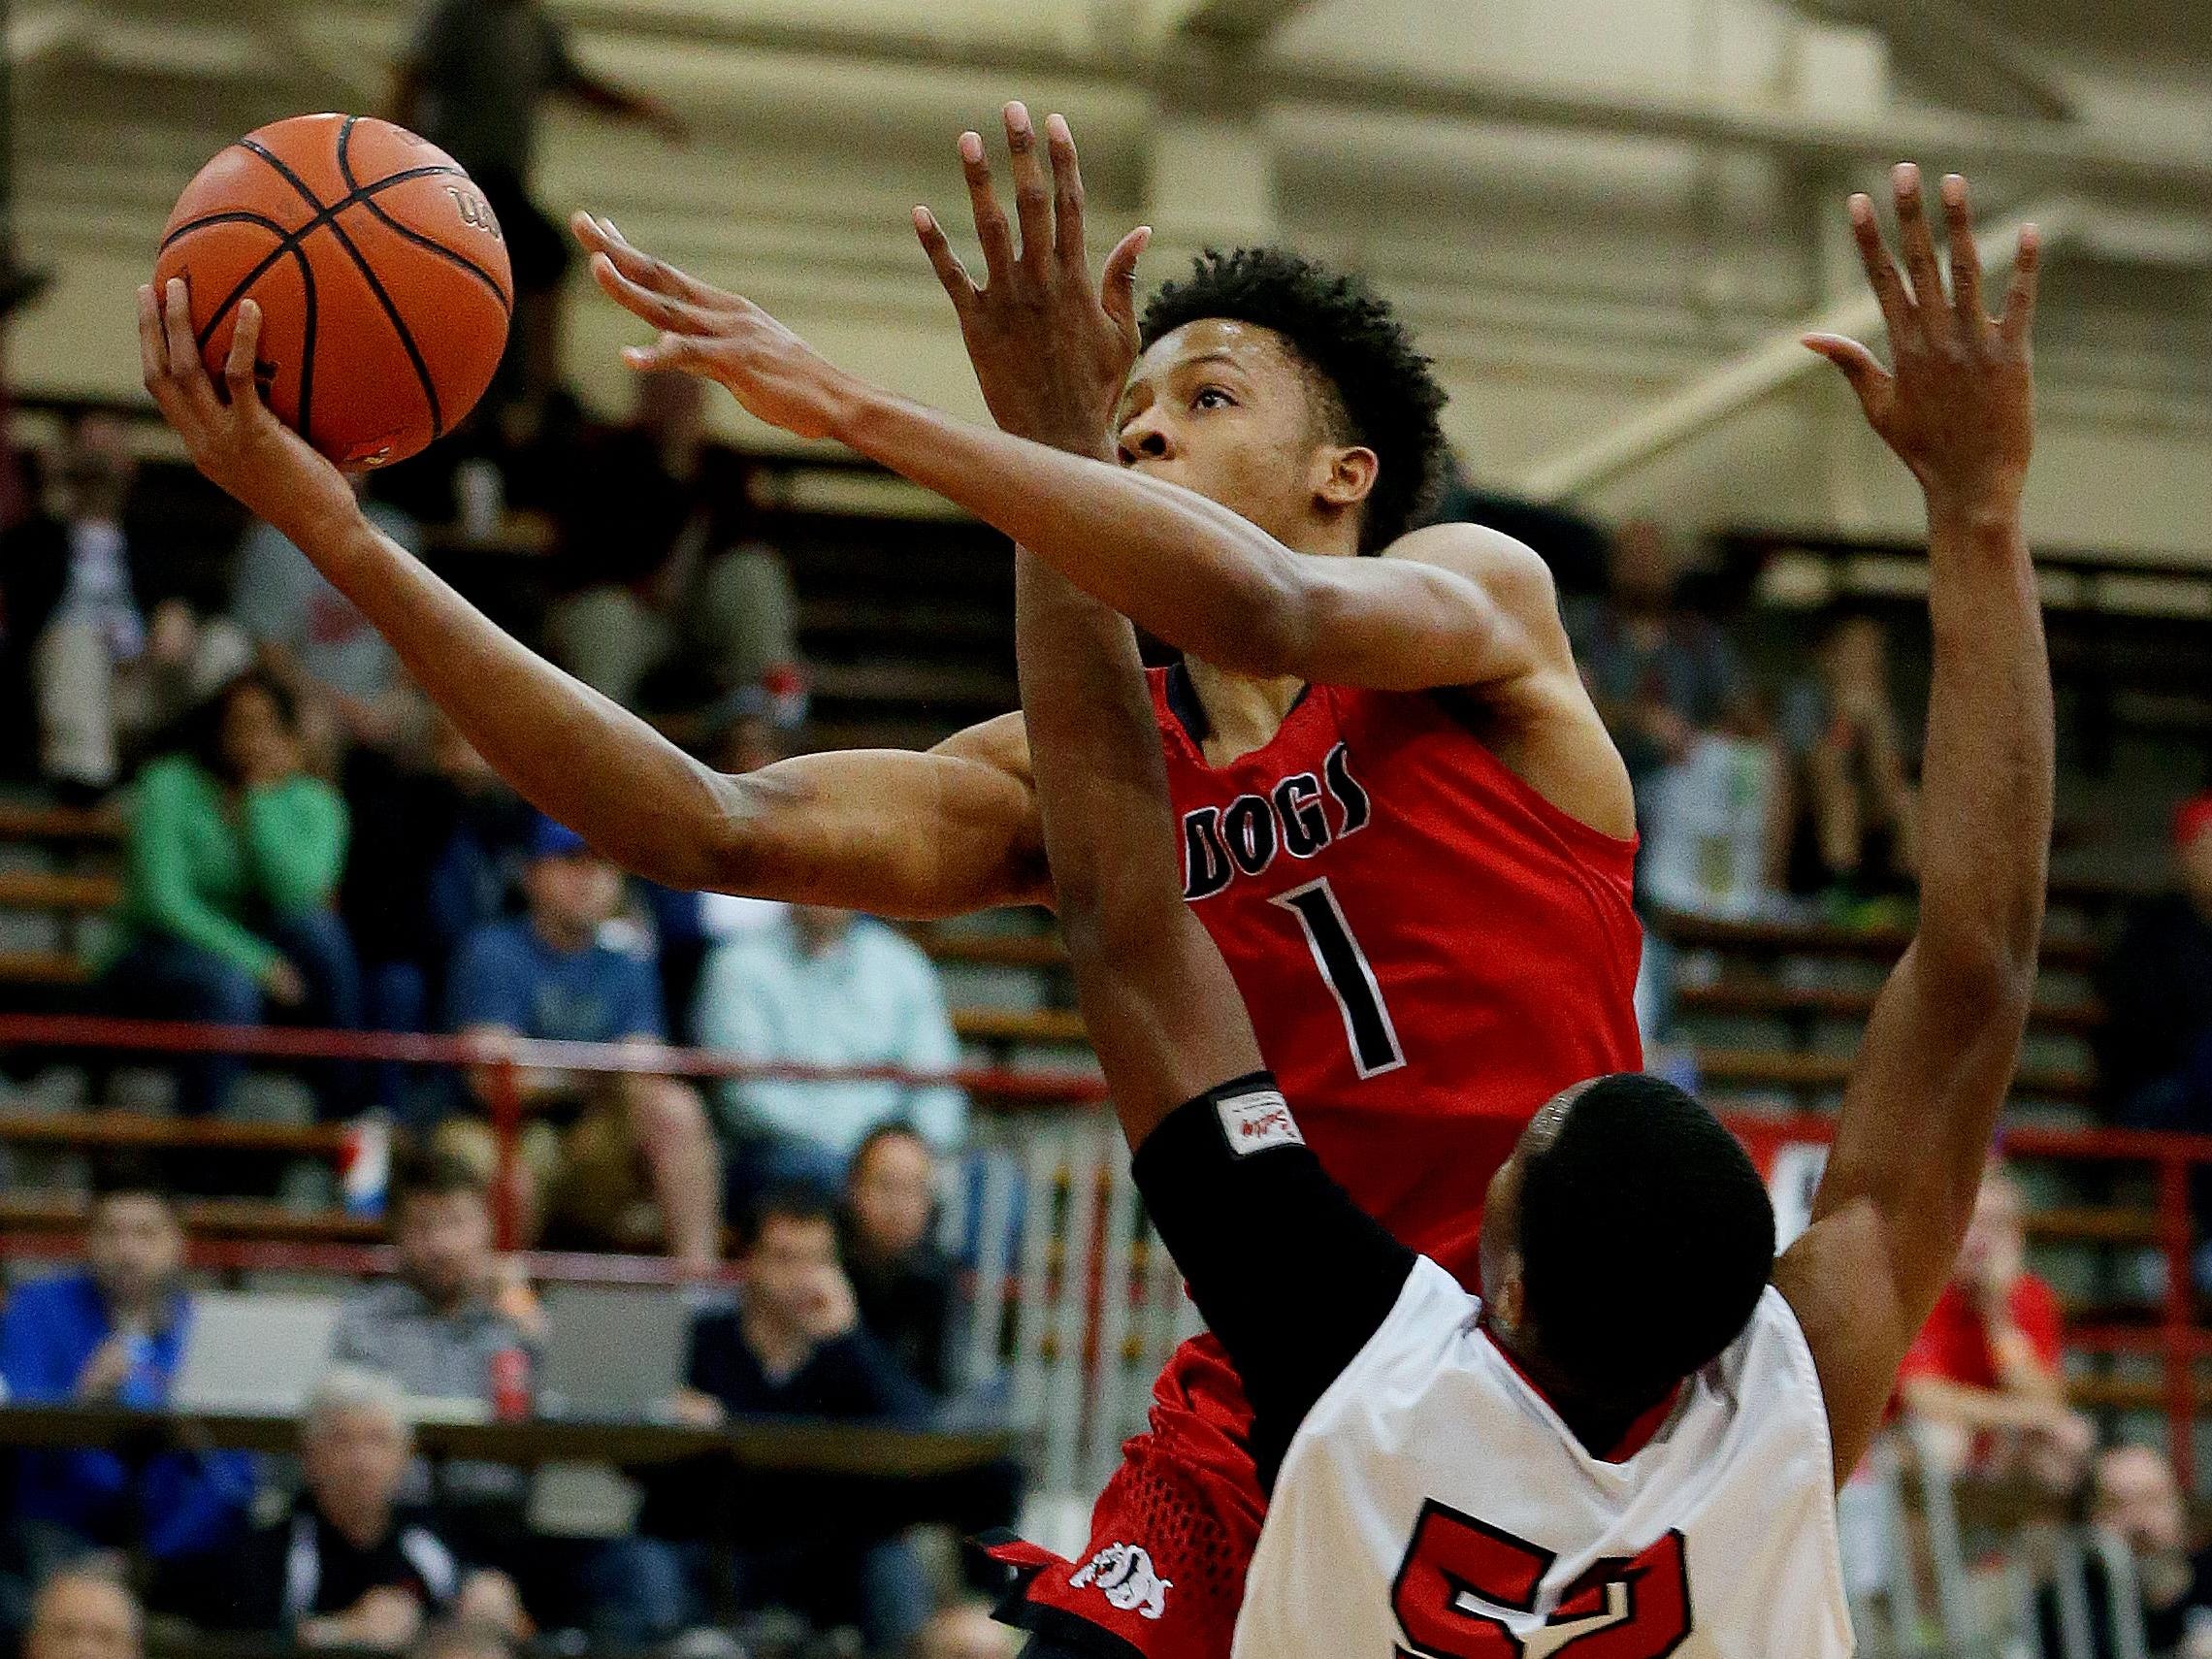 New Albany’s Romeo Langford (1) goes up for the shot and is fouled by Pike’s Durante Lee (52) during the Tip Off Classic on Dec. 12, 2015.